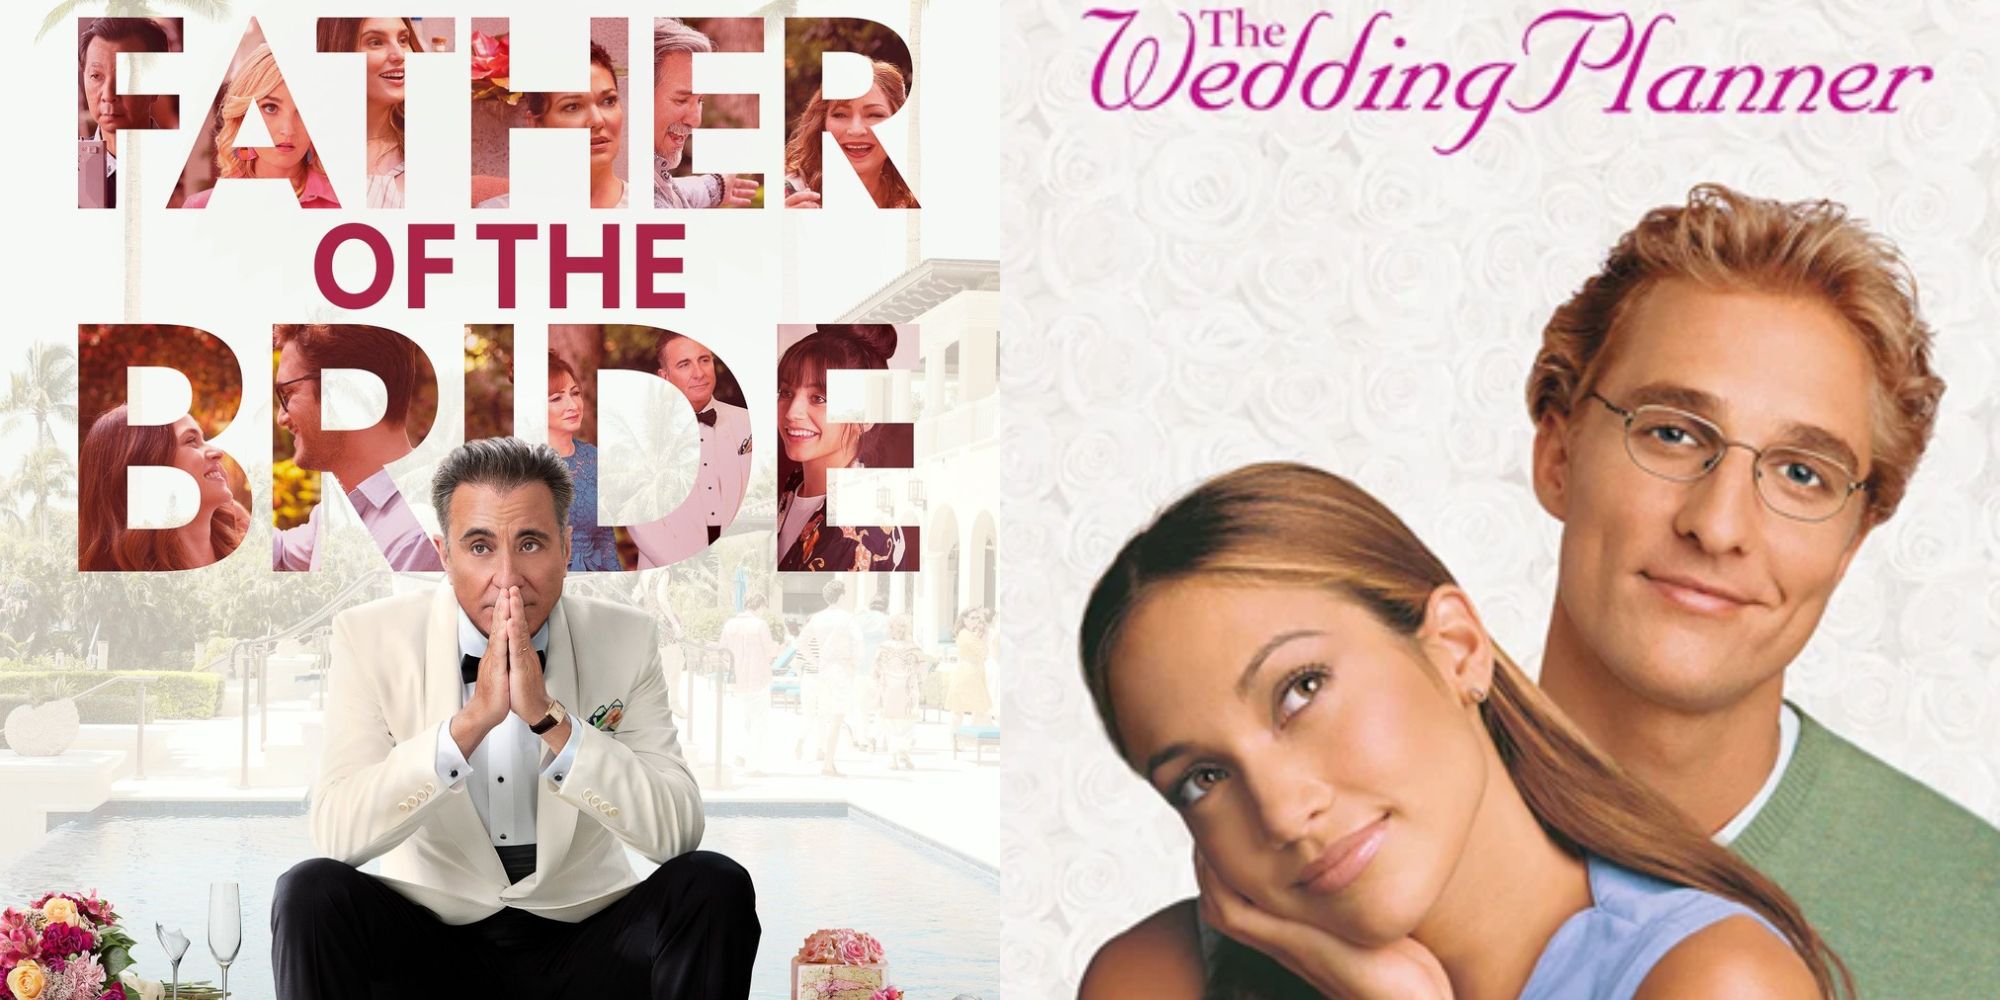 Split image showing posters for Father of the Bride and The Wedding Planner.